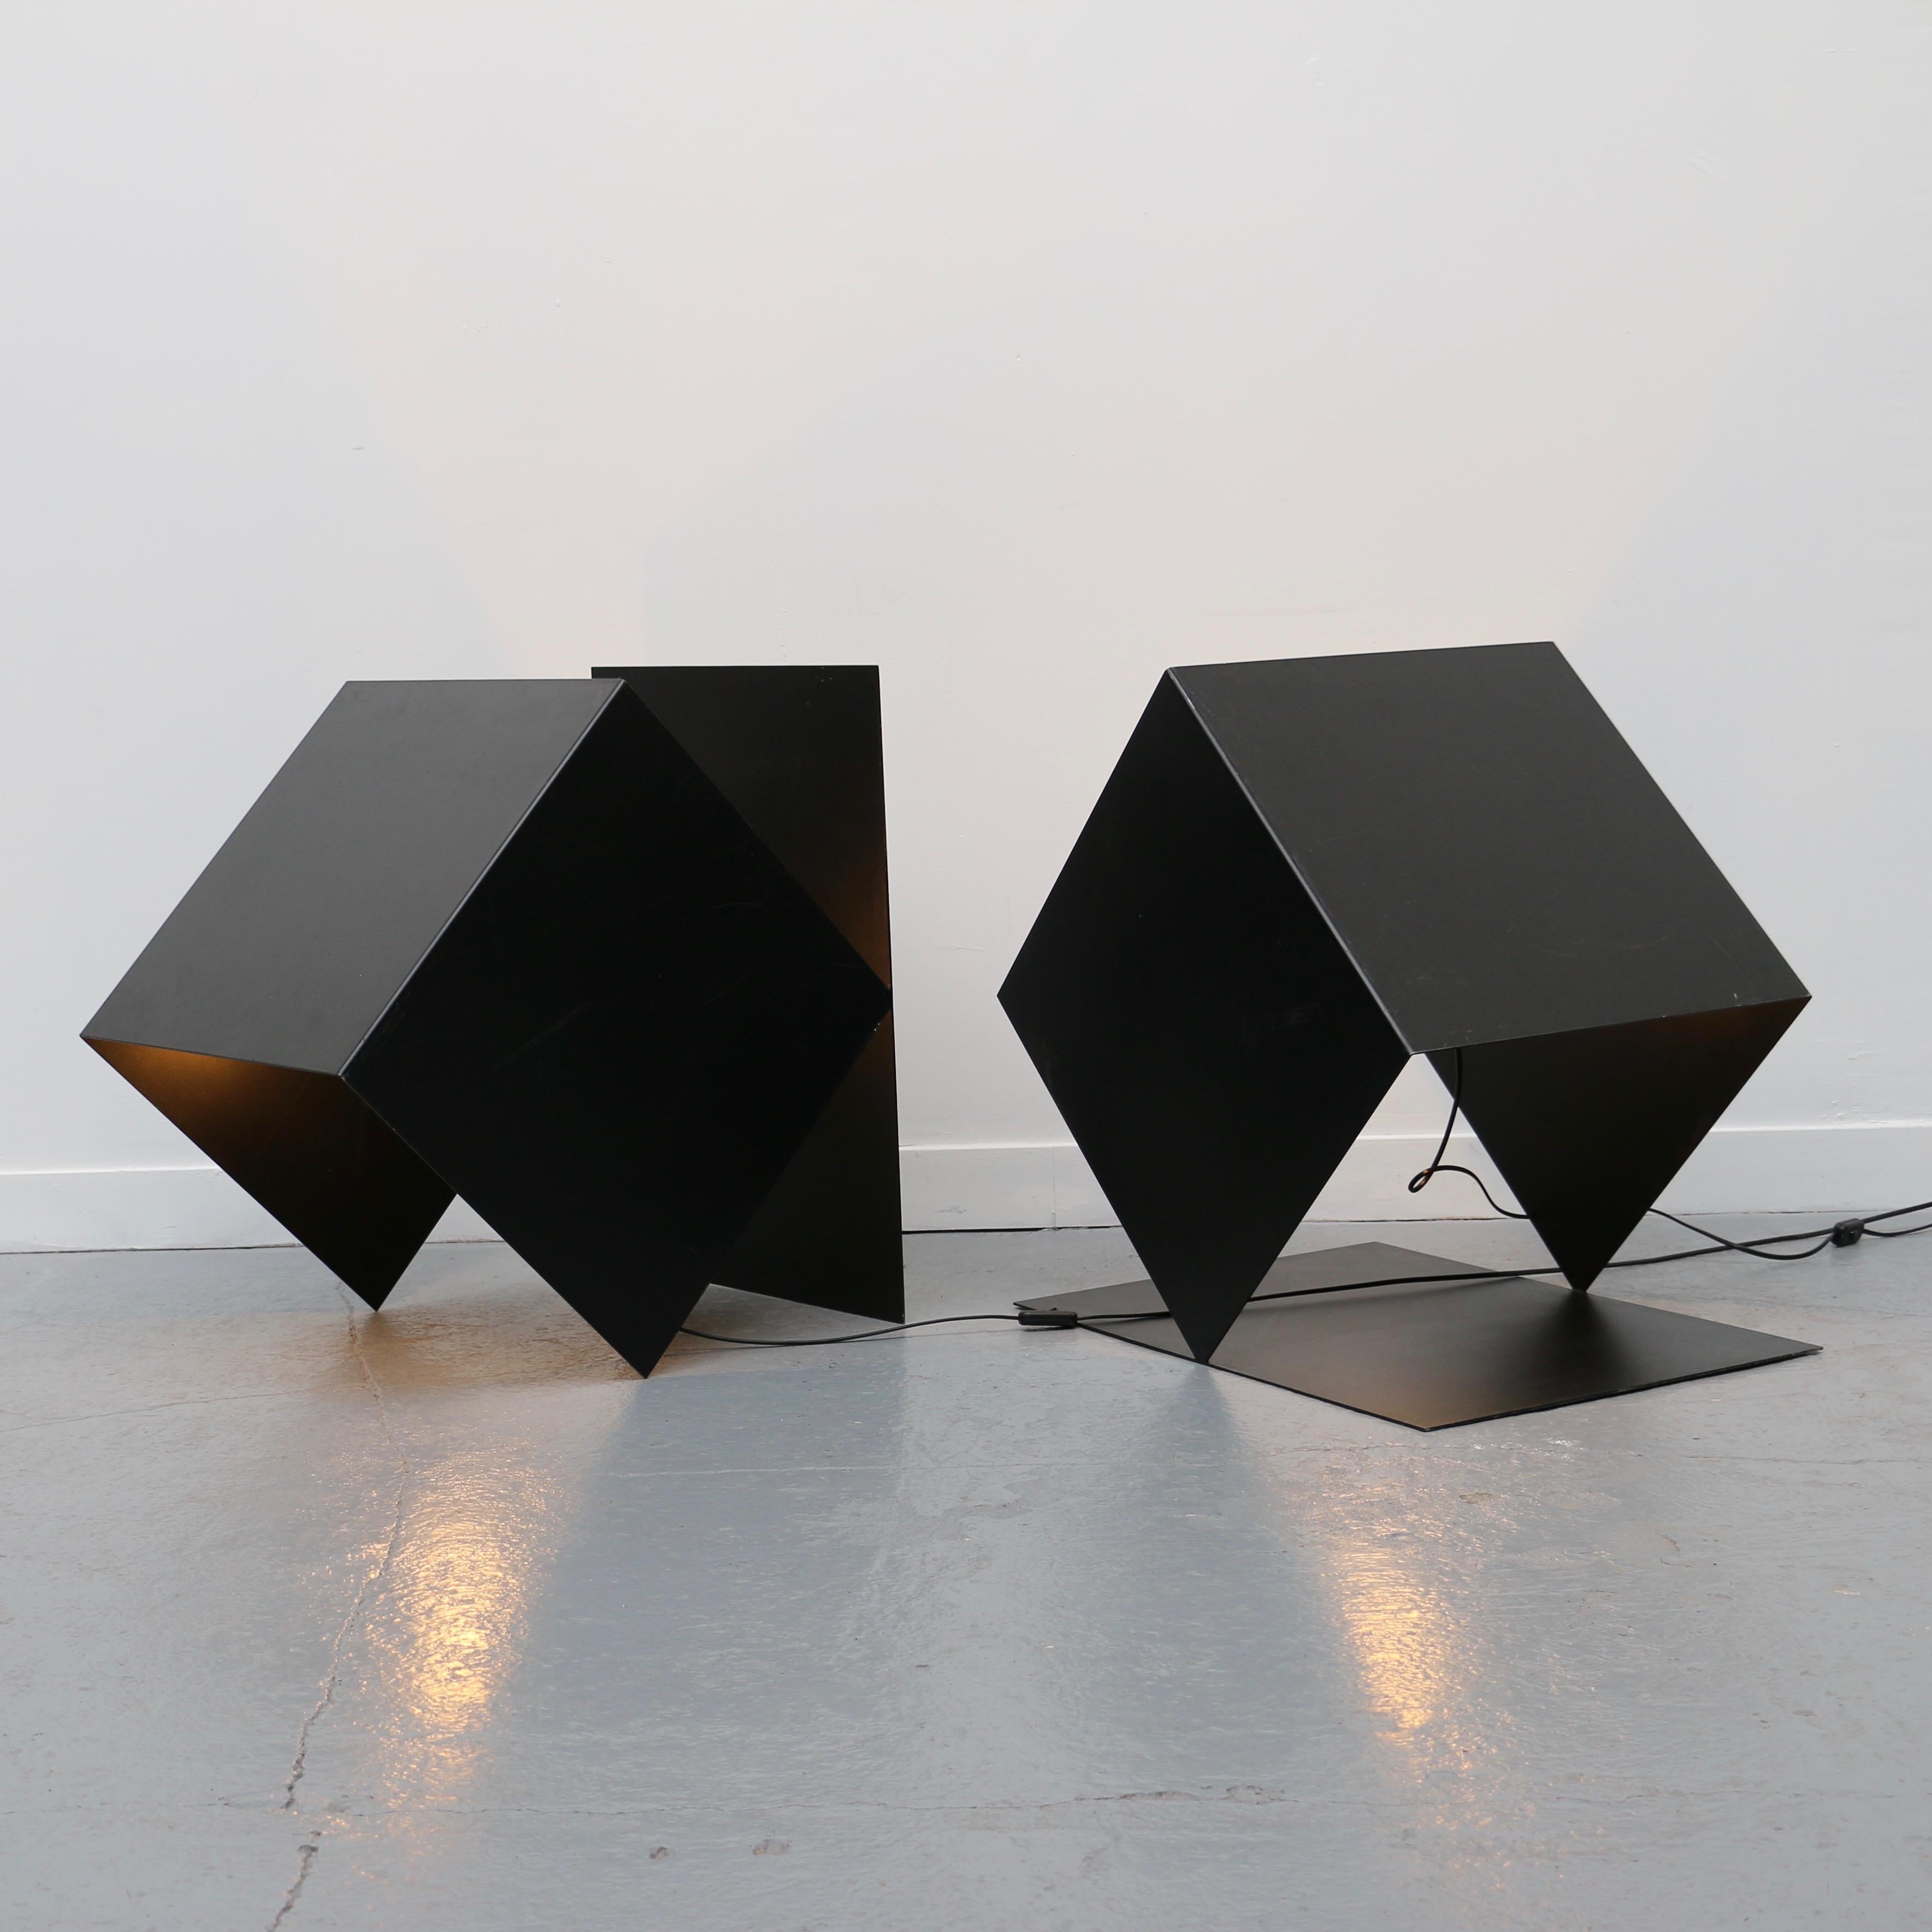 Prototypes Lacquered Sculpture Lamps from François Mascarello, France, 2000s In Good Condition For Sale In VILLERS-SUR-MER, FR